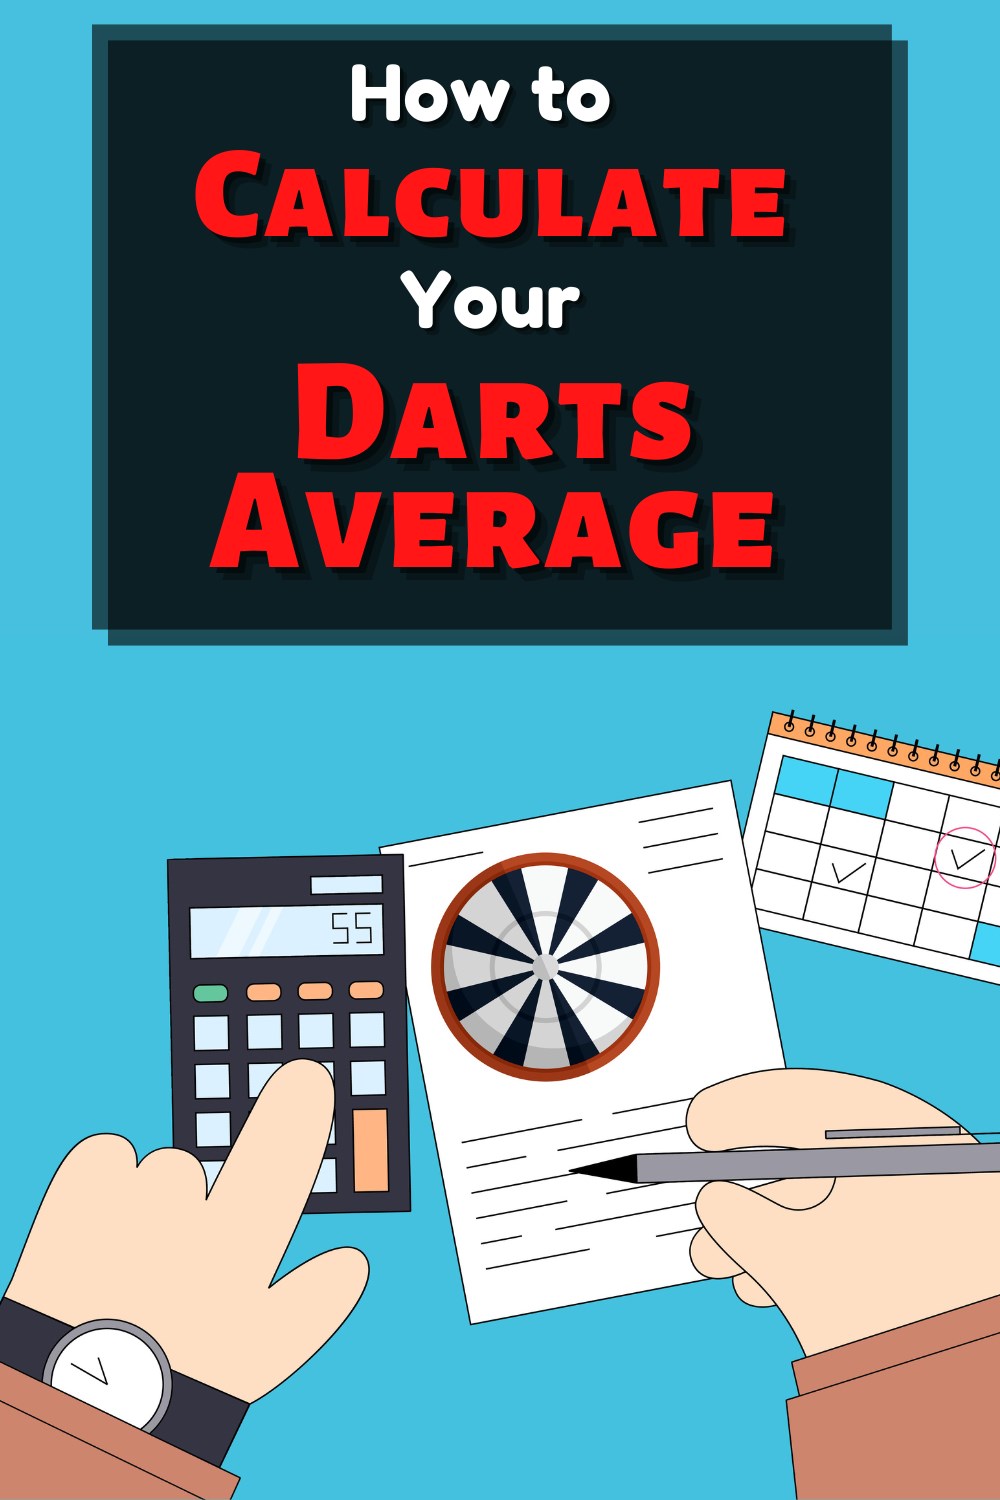 The equation to calculate your darts average